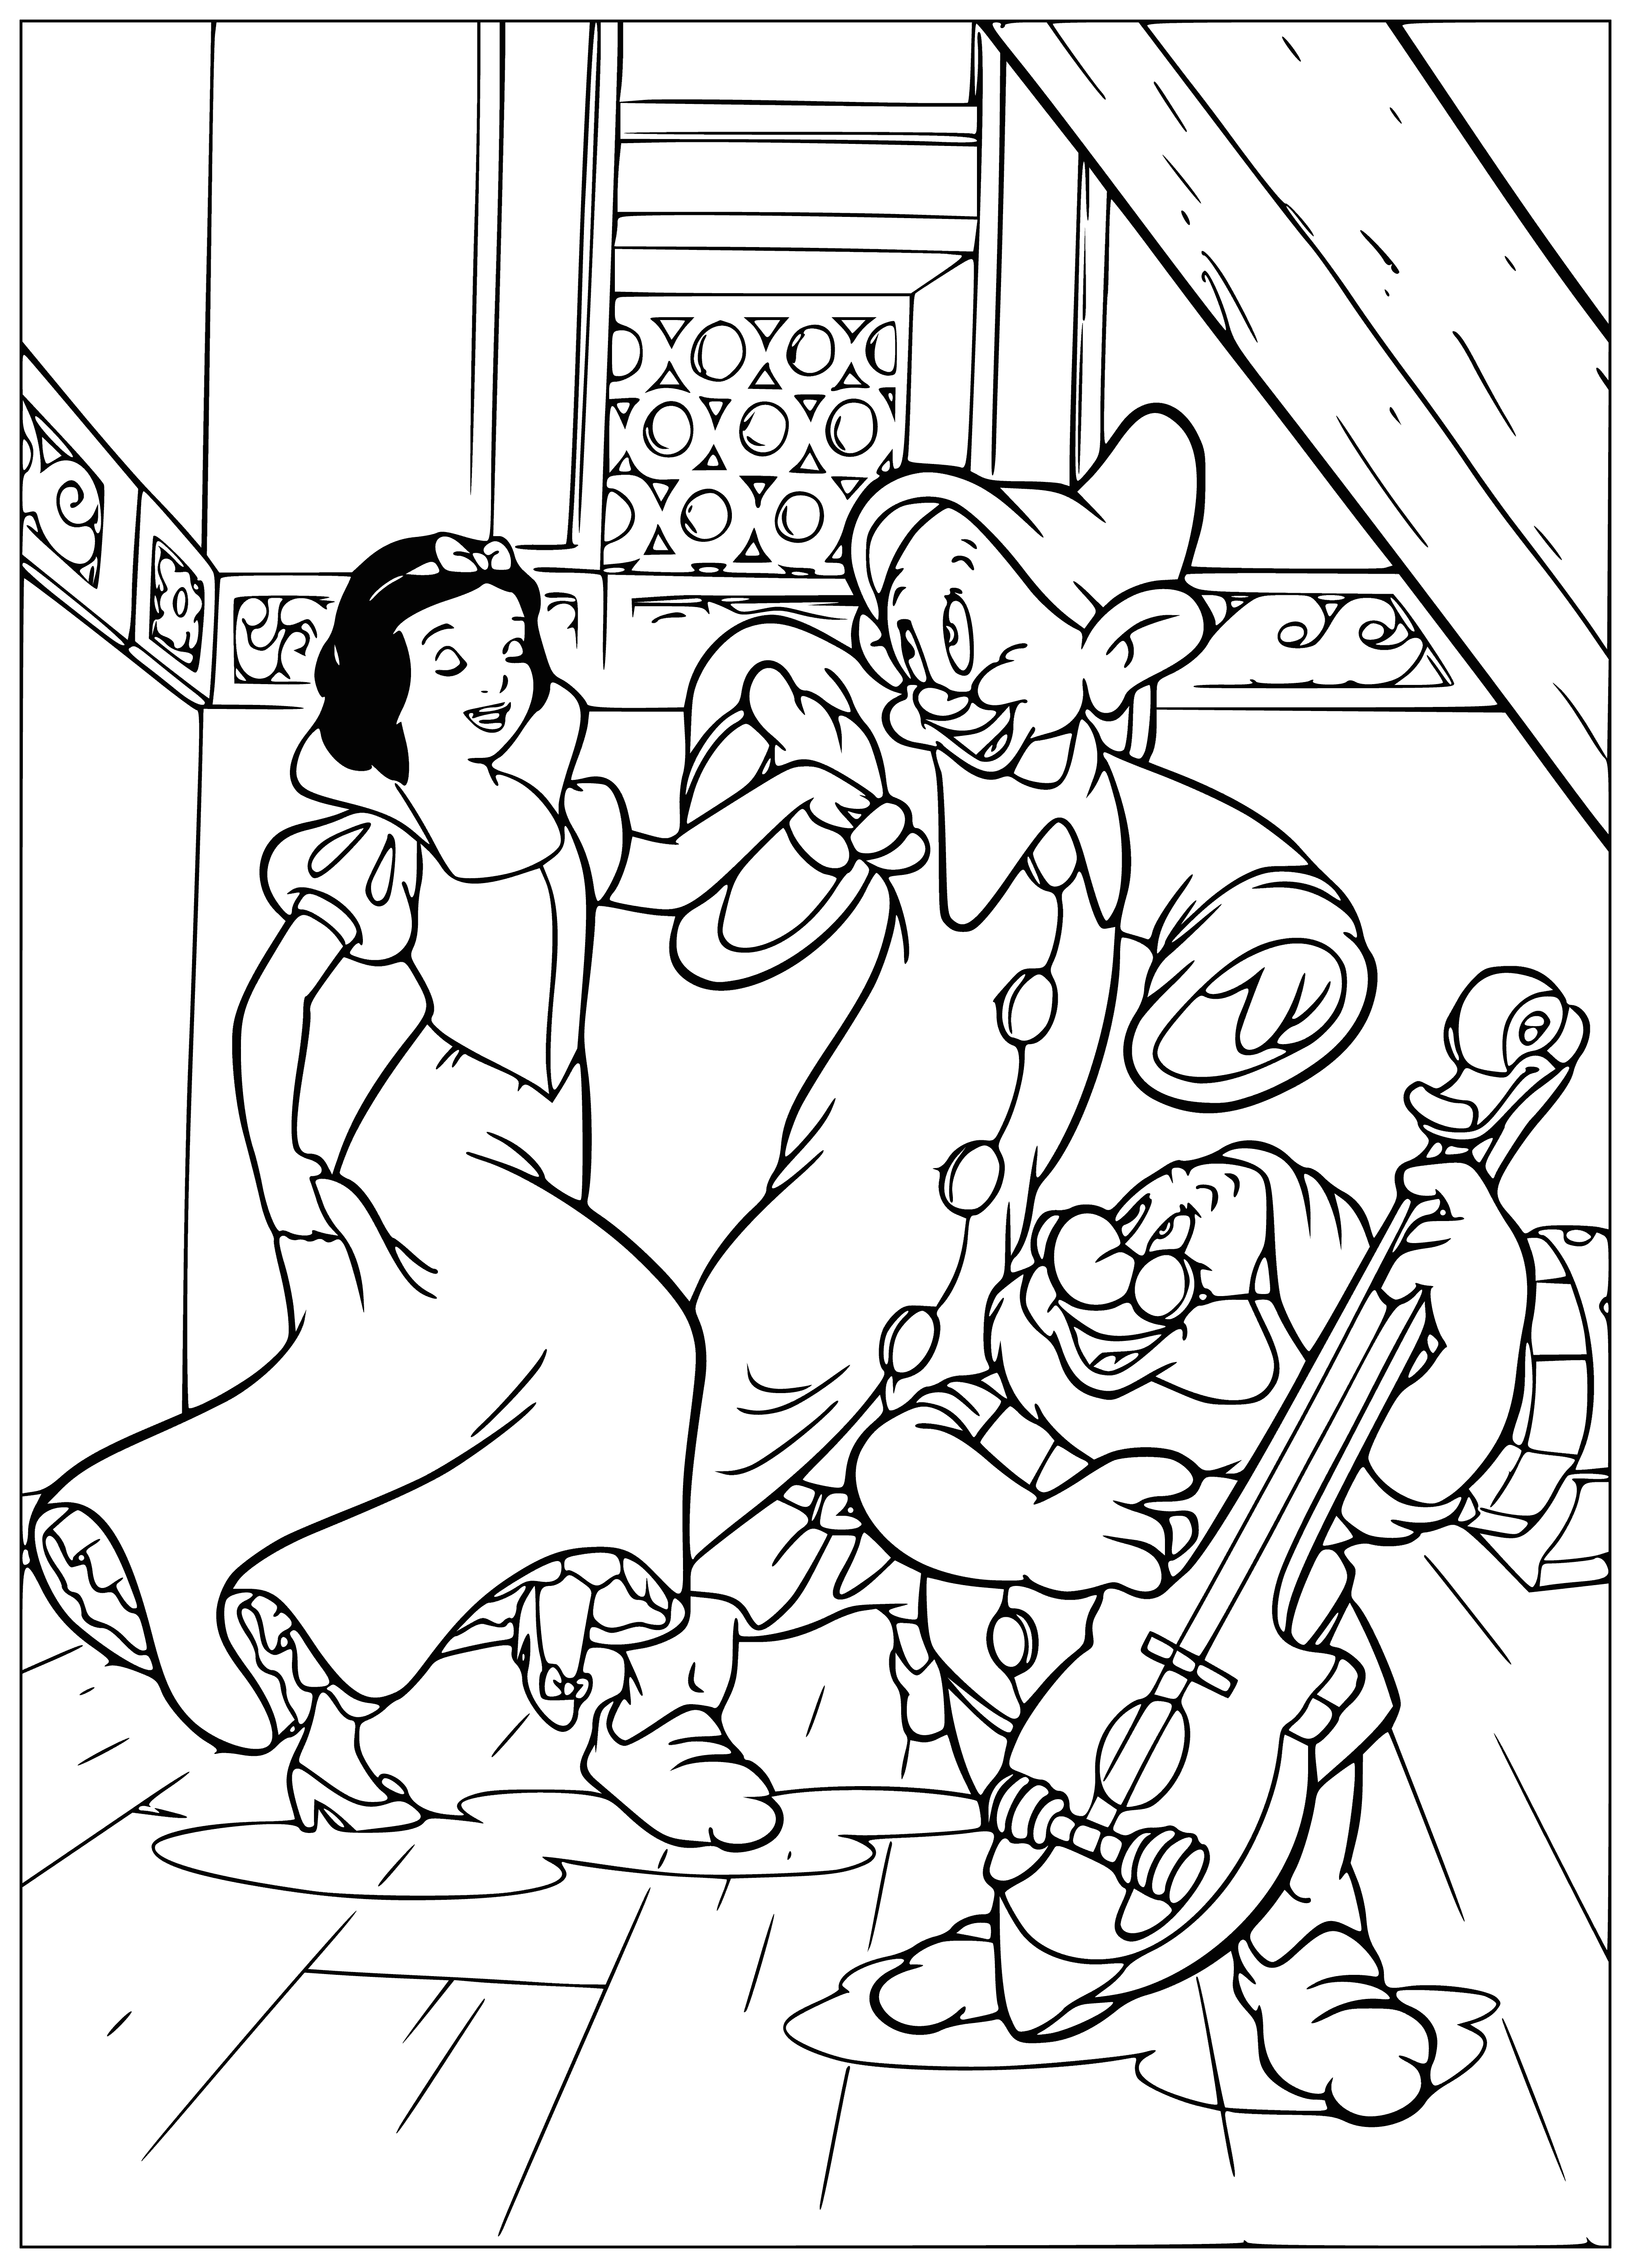 coloring page: Snow White cleans and sings in the Dwarfs' cottage, while outside they chop wood. #happilyeverafter